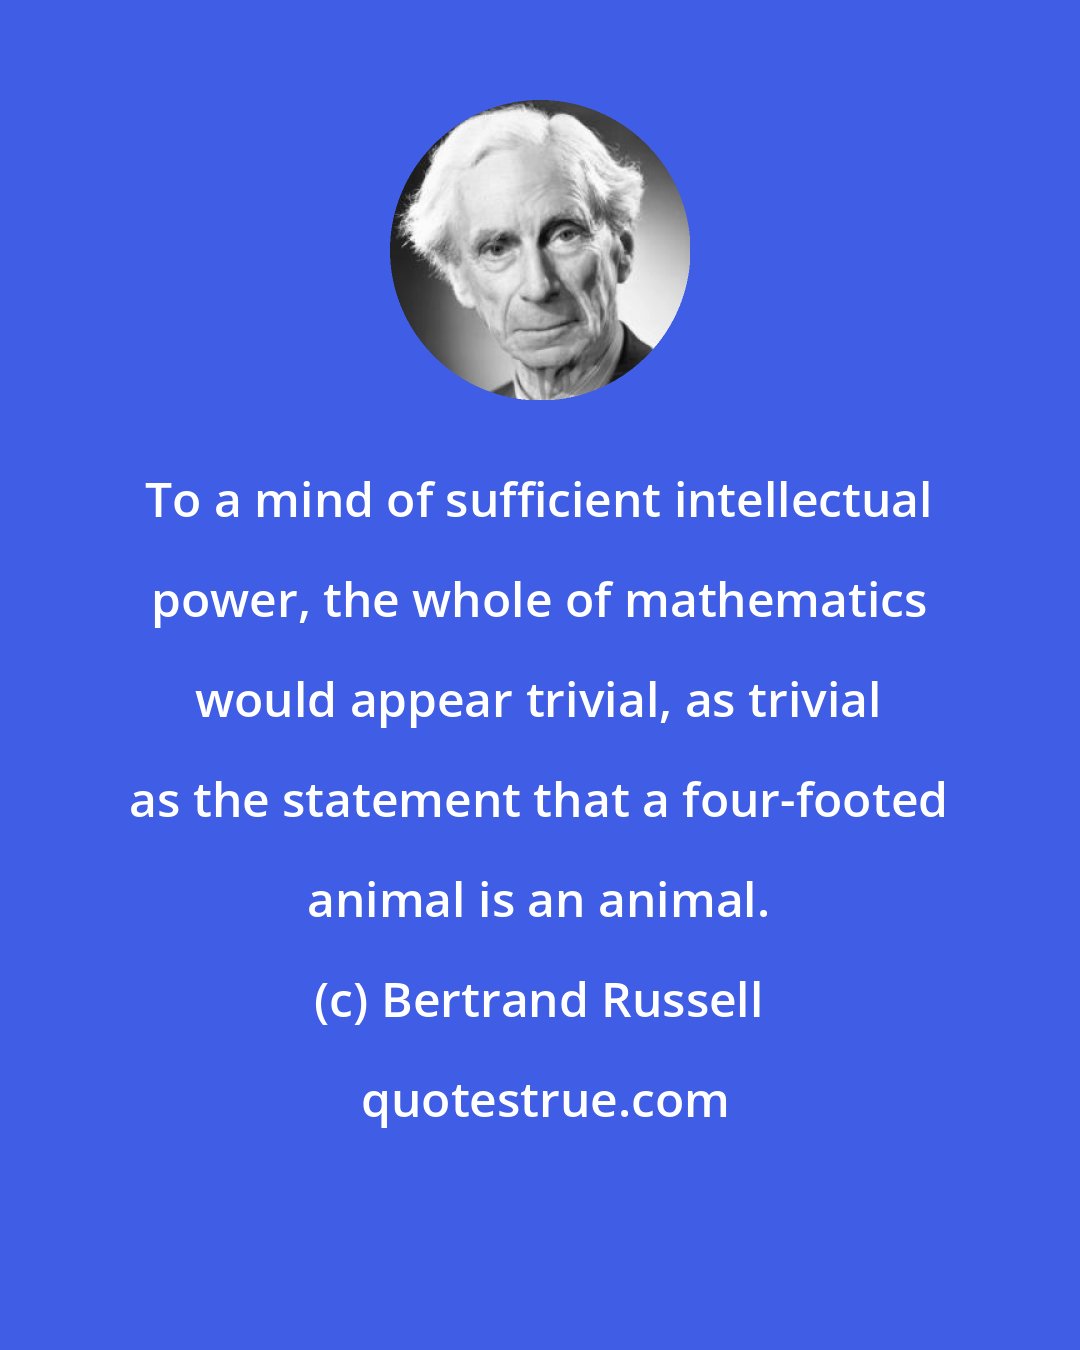 Bertrand Russell: To a mind of sufficient intellectual power, the whole of mathematics would appear trivial, as trivial as the statement that a four-footed animal is an animal.